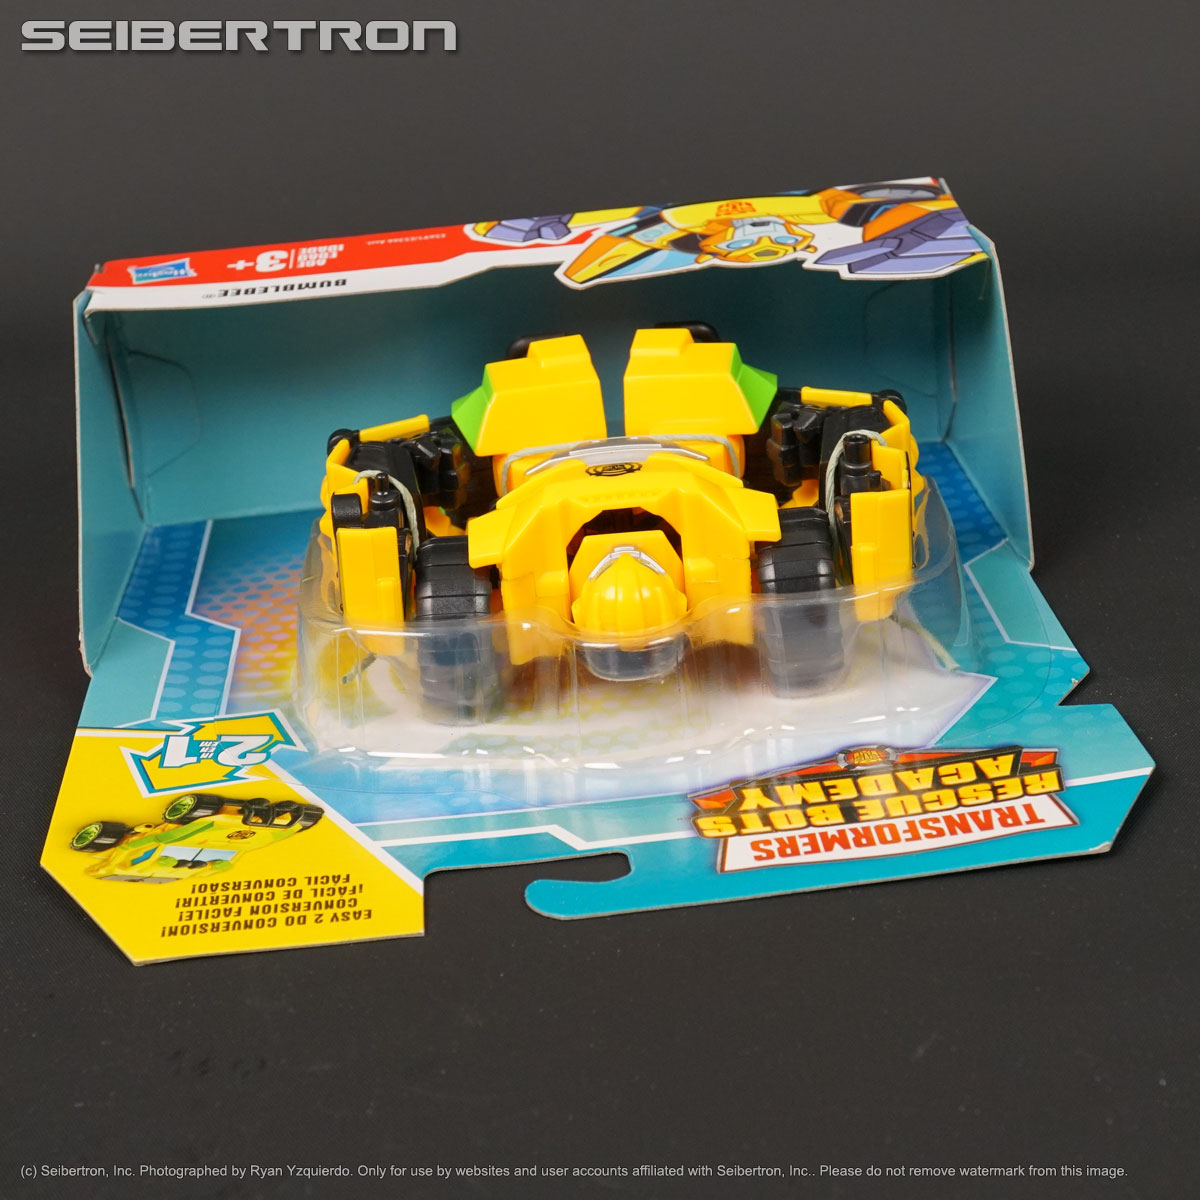 Rescan BUMBLEBEE Transformers Rescue Bots Academy Playskool 2020 Offroad vehicle New